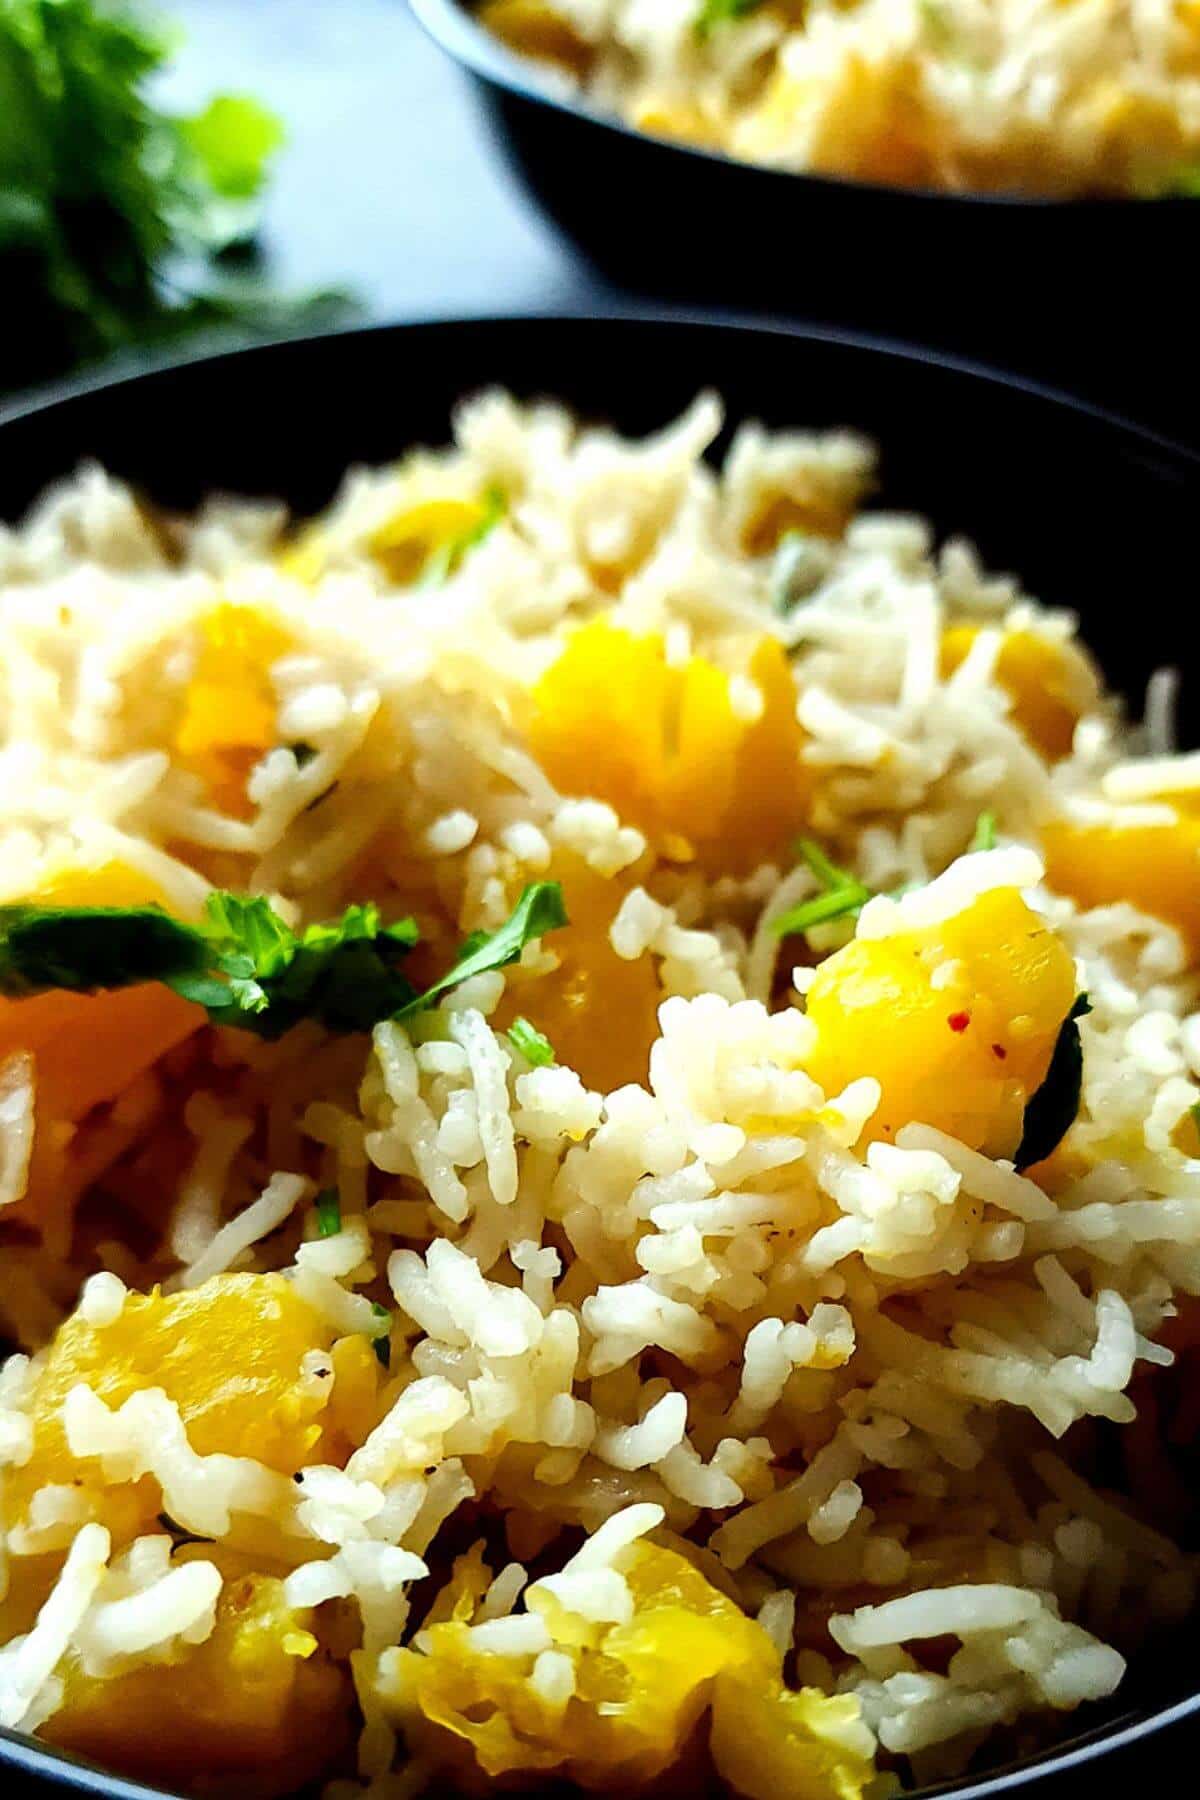 Pumpkin coconut rice garnished with chopped cilantro.